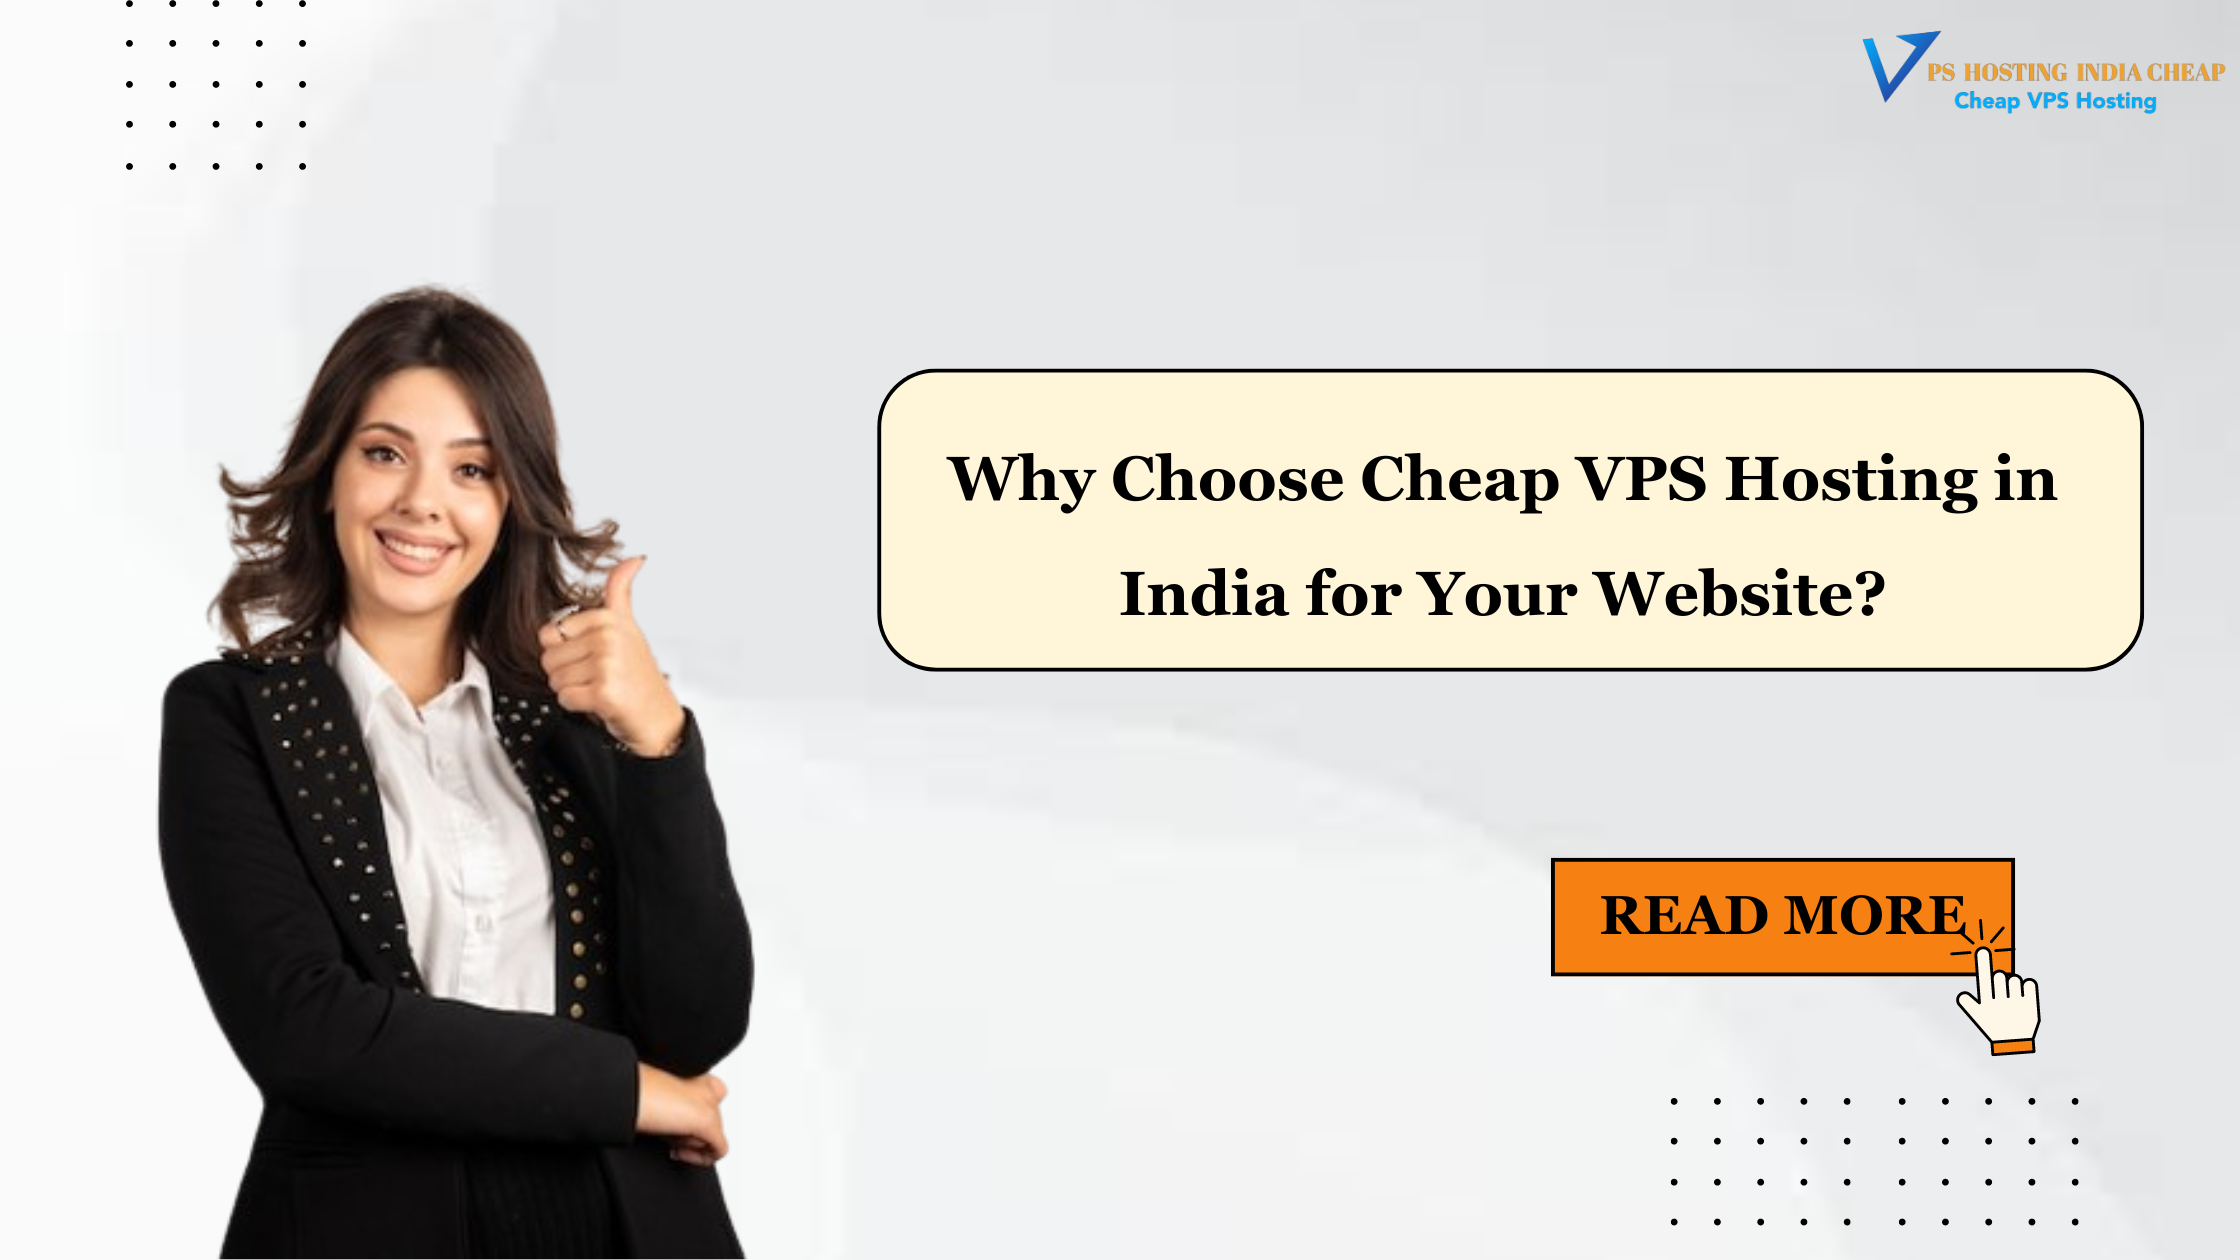 Why Choose Cheap VPS Hosting in India for Your Website